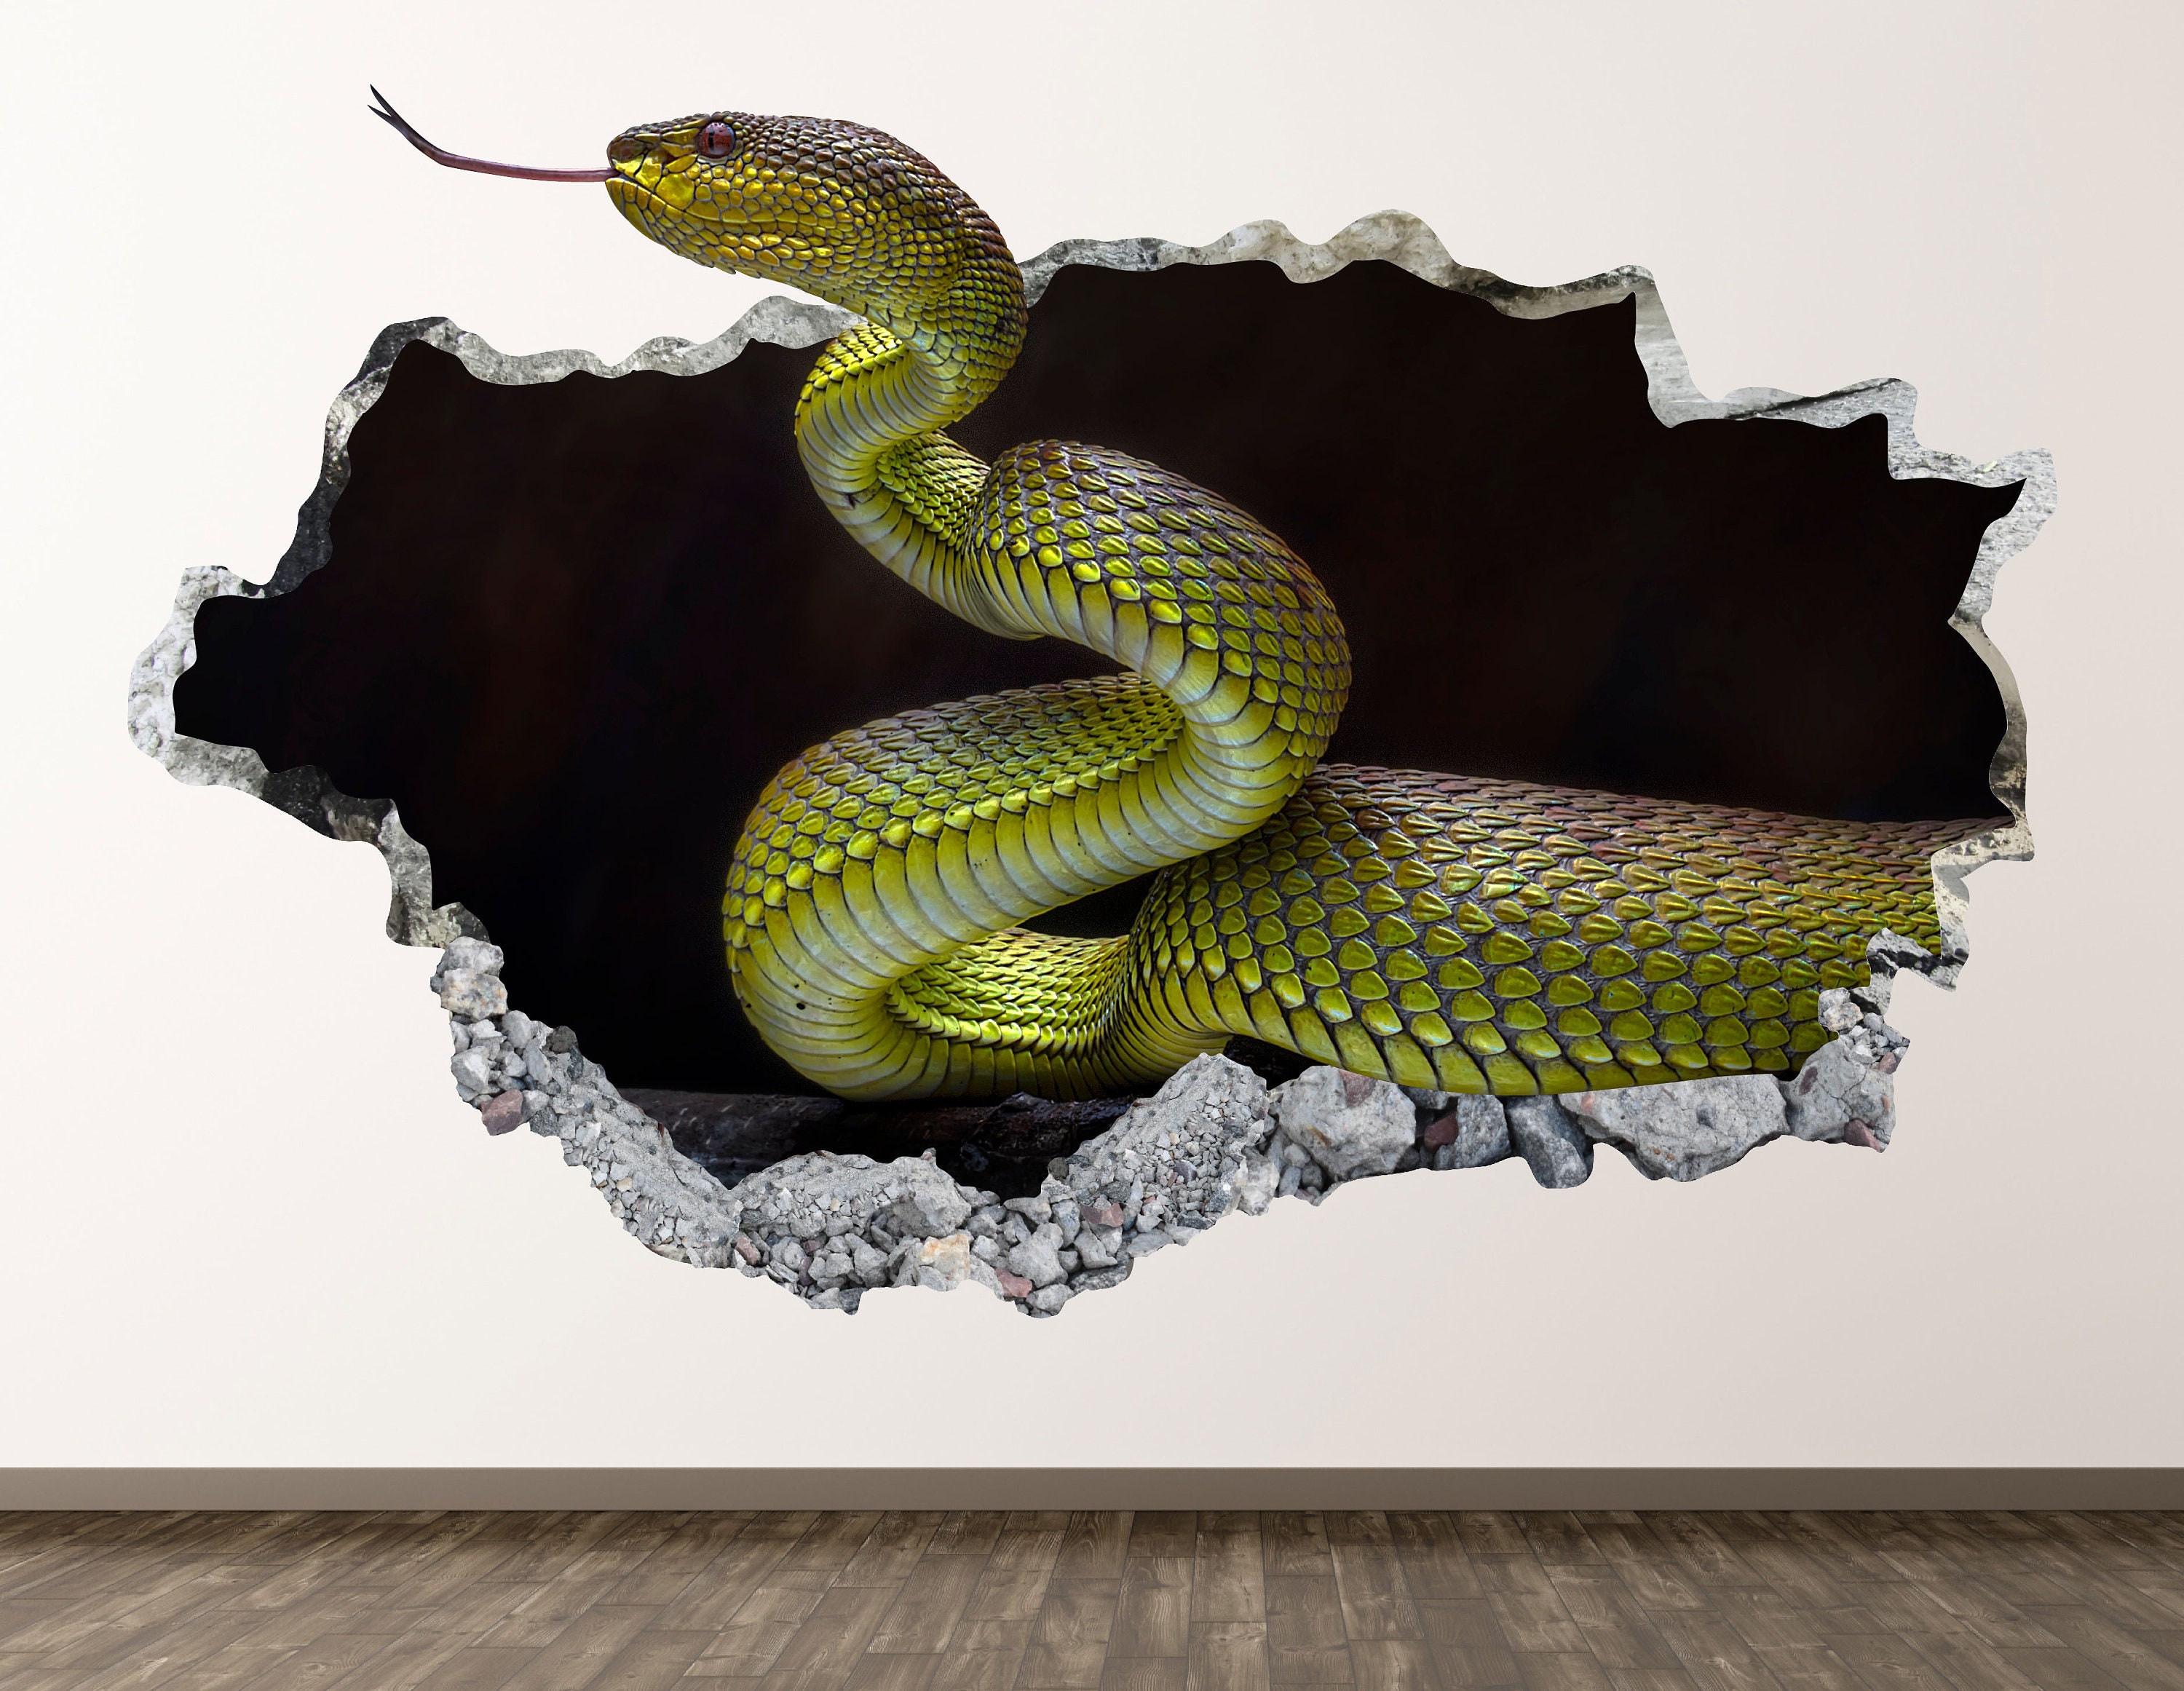 Viper Snake Animal Wildlife 3D Wall Sticker Mural Decal Home Office Decor CT31 